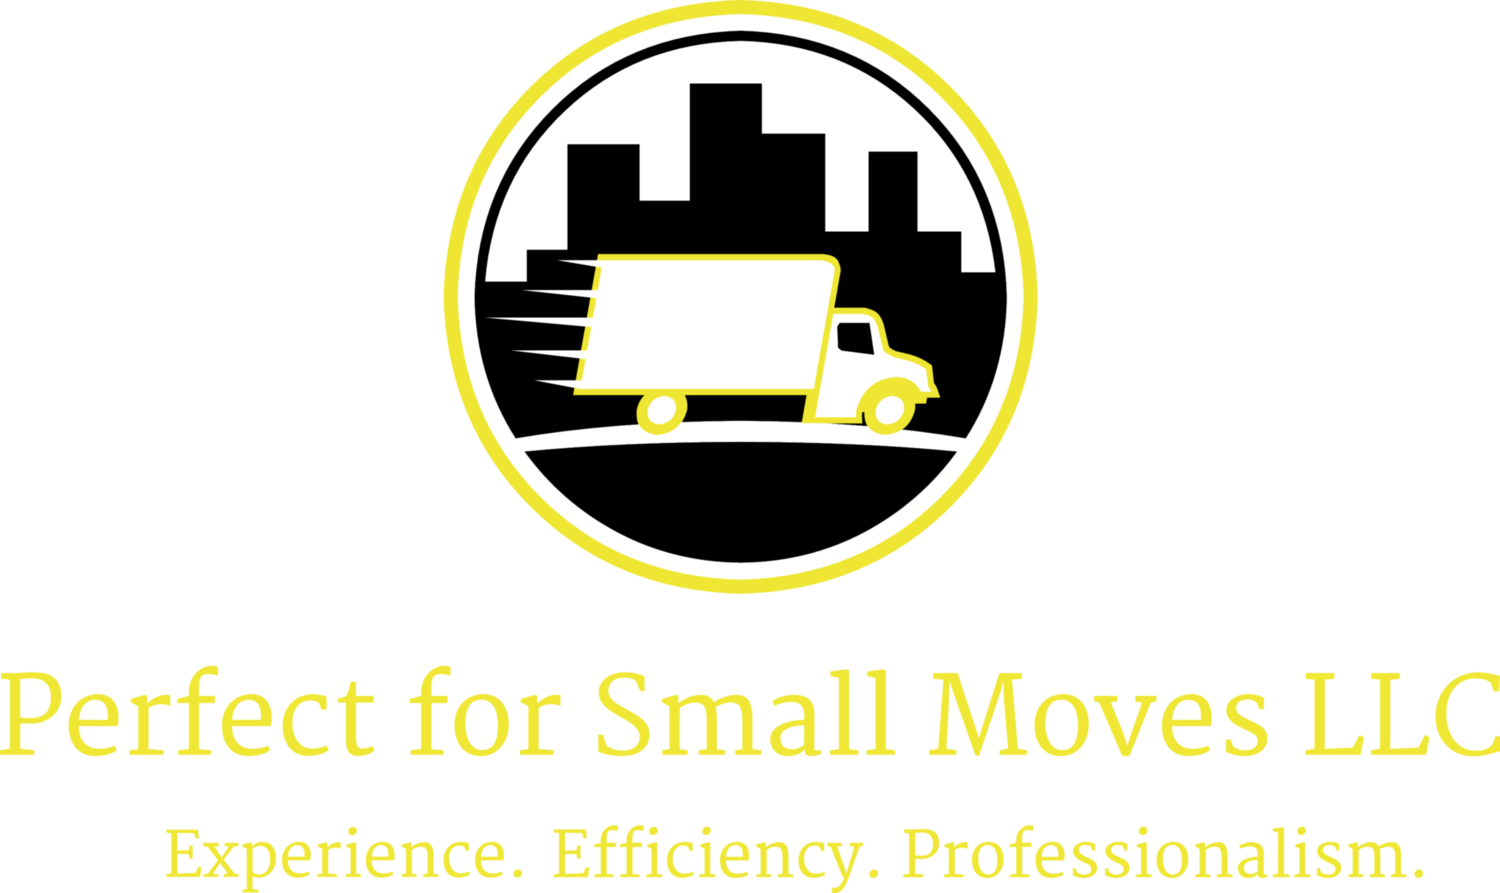 Perfect For Small Moves, LLC